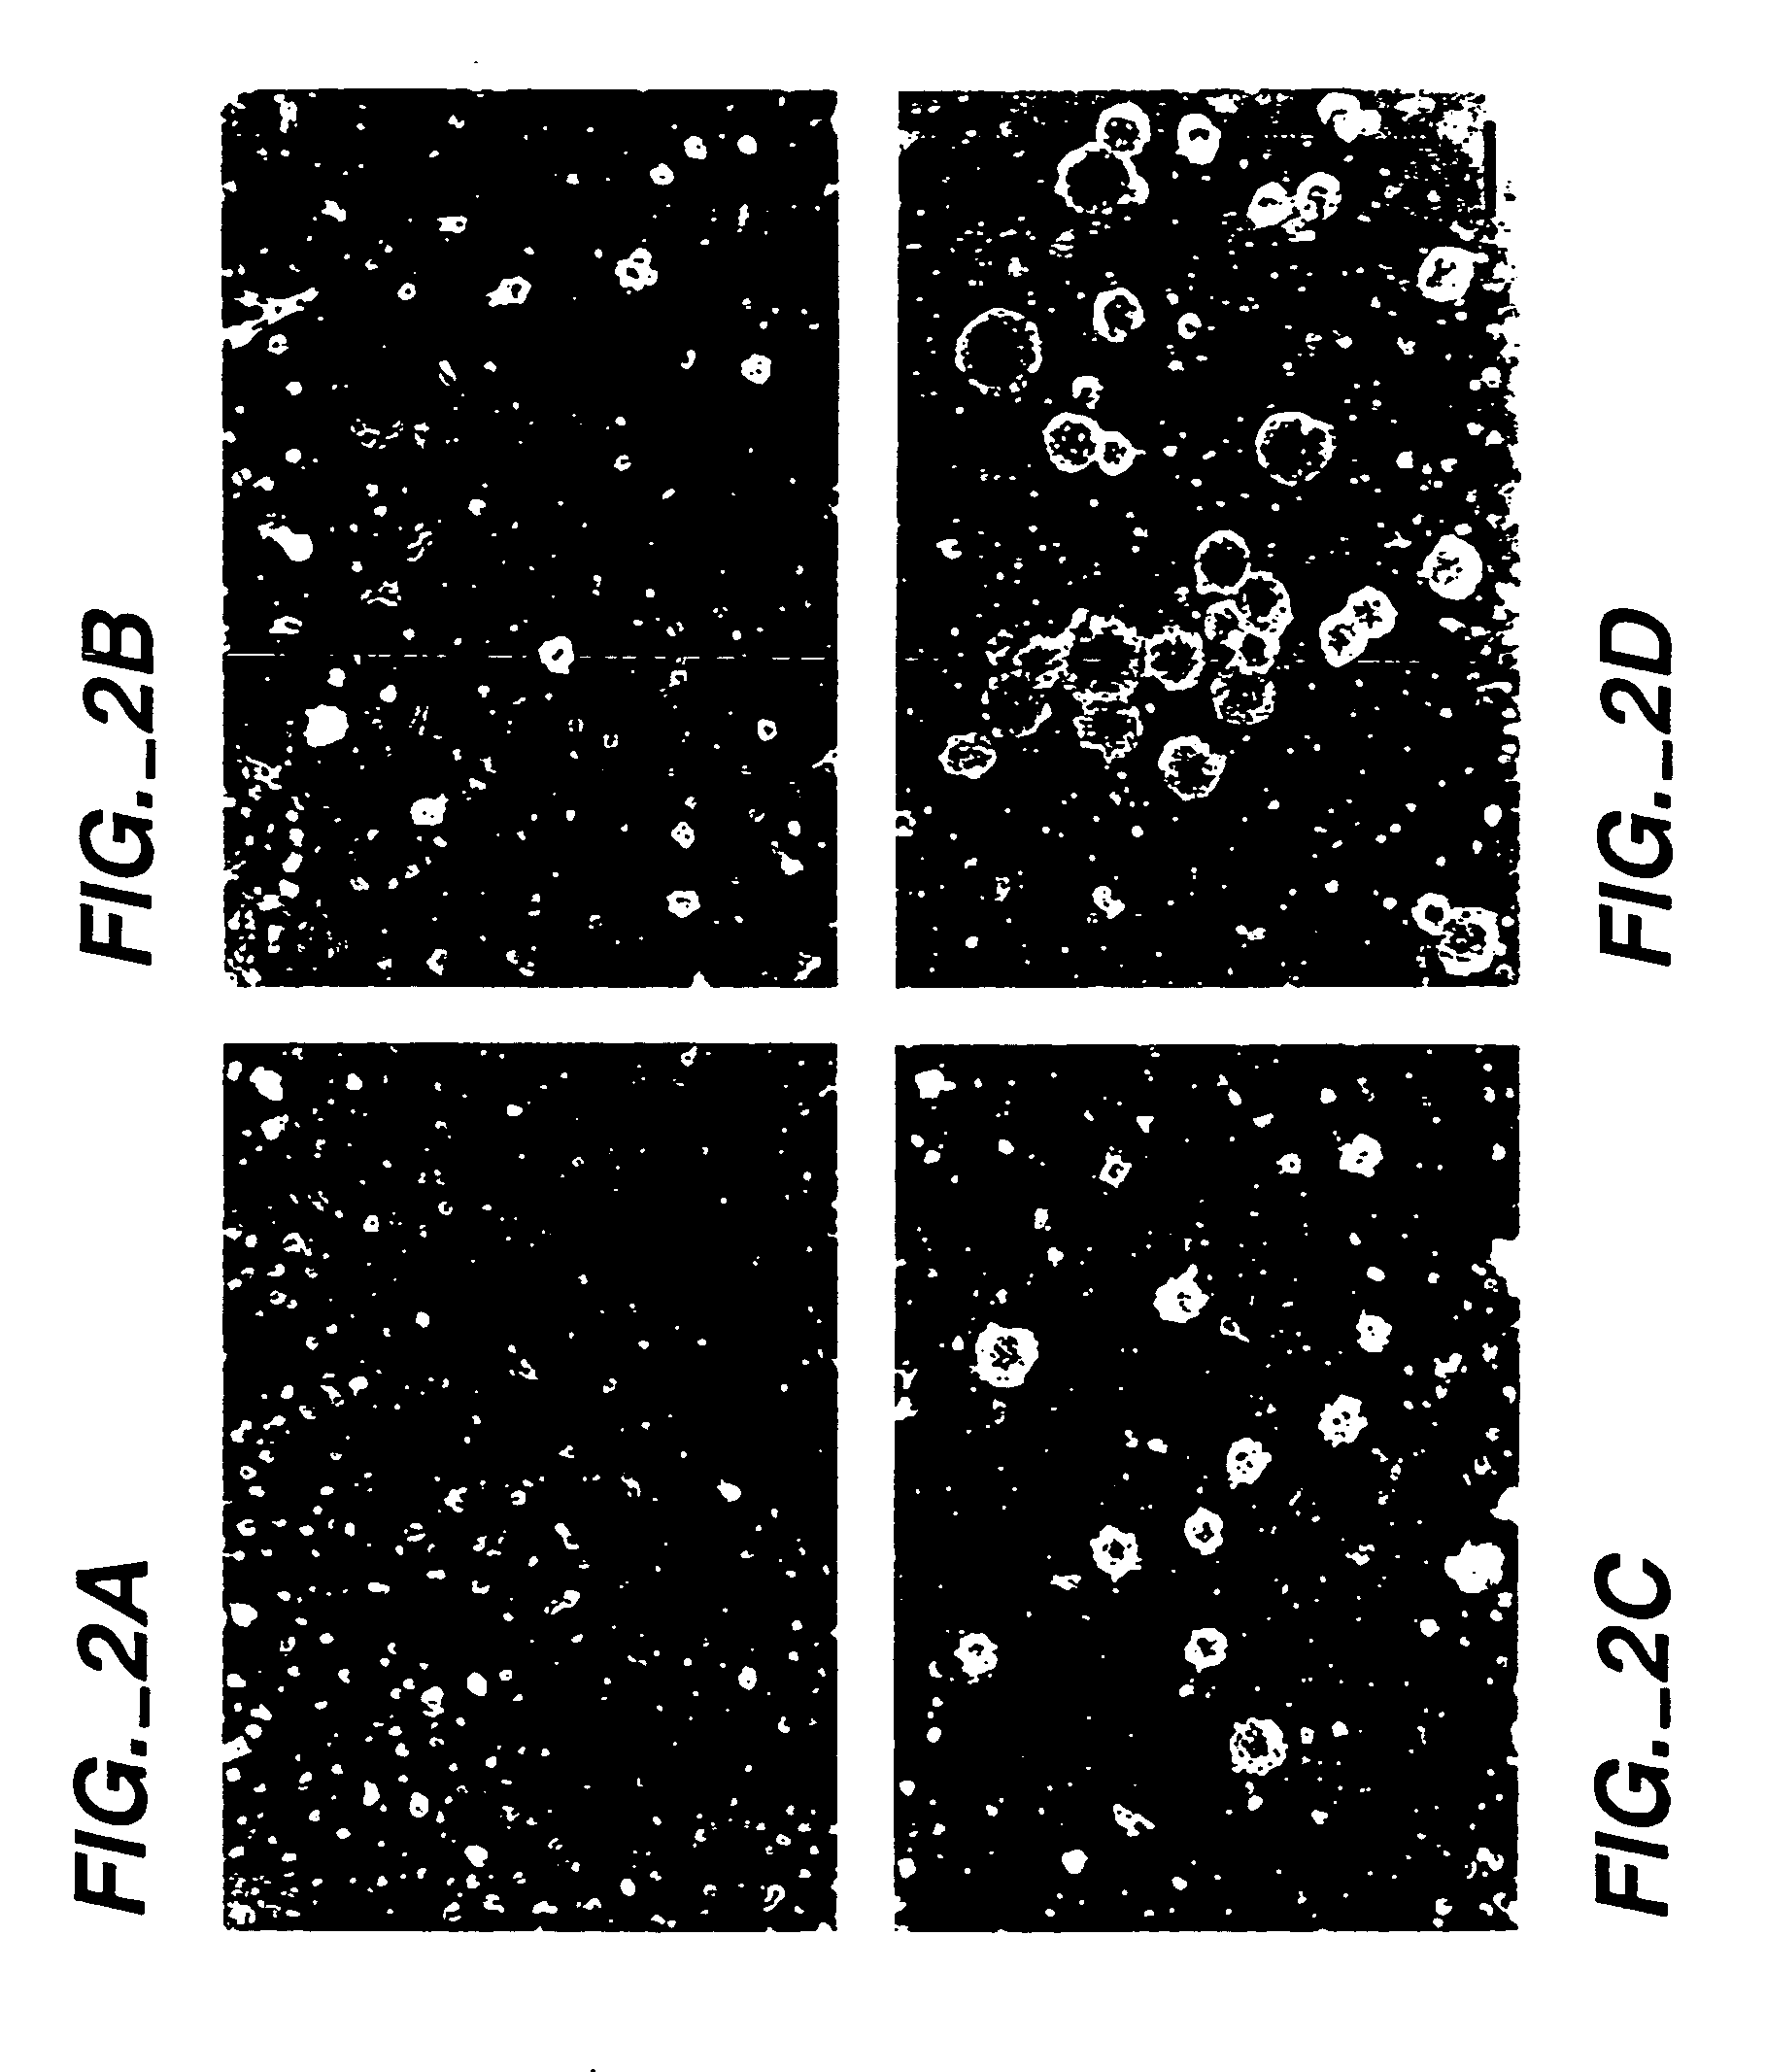 Methods of proliferating undifferentiated neural cells